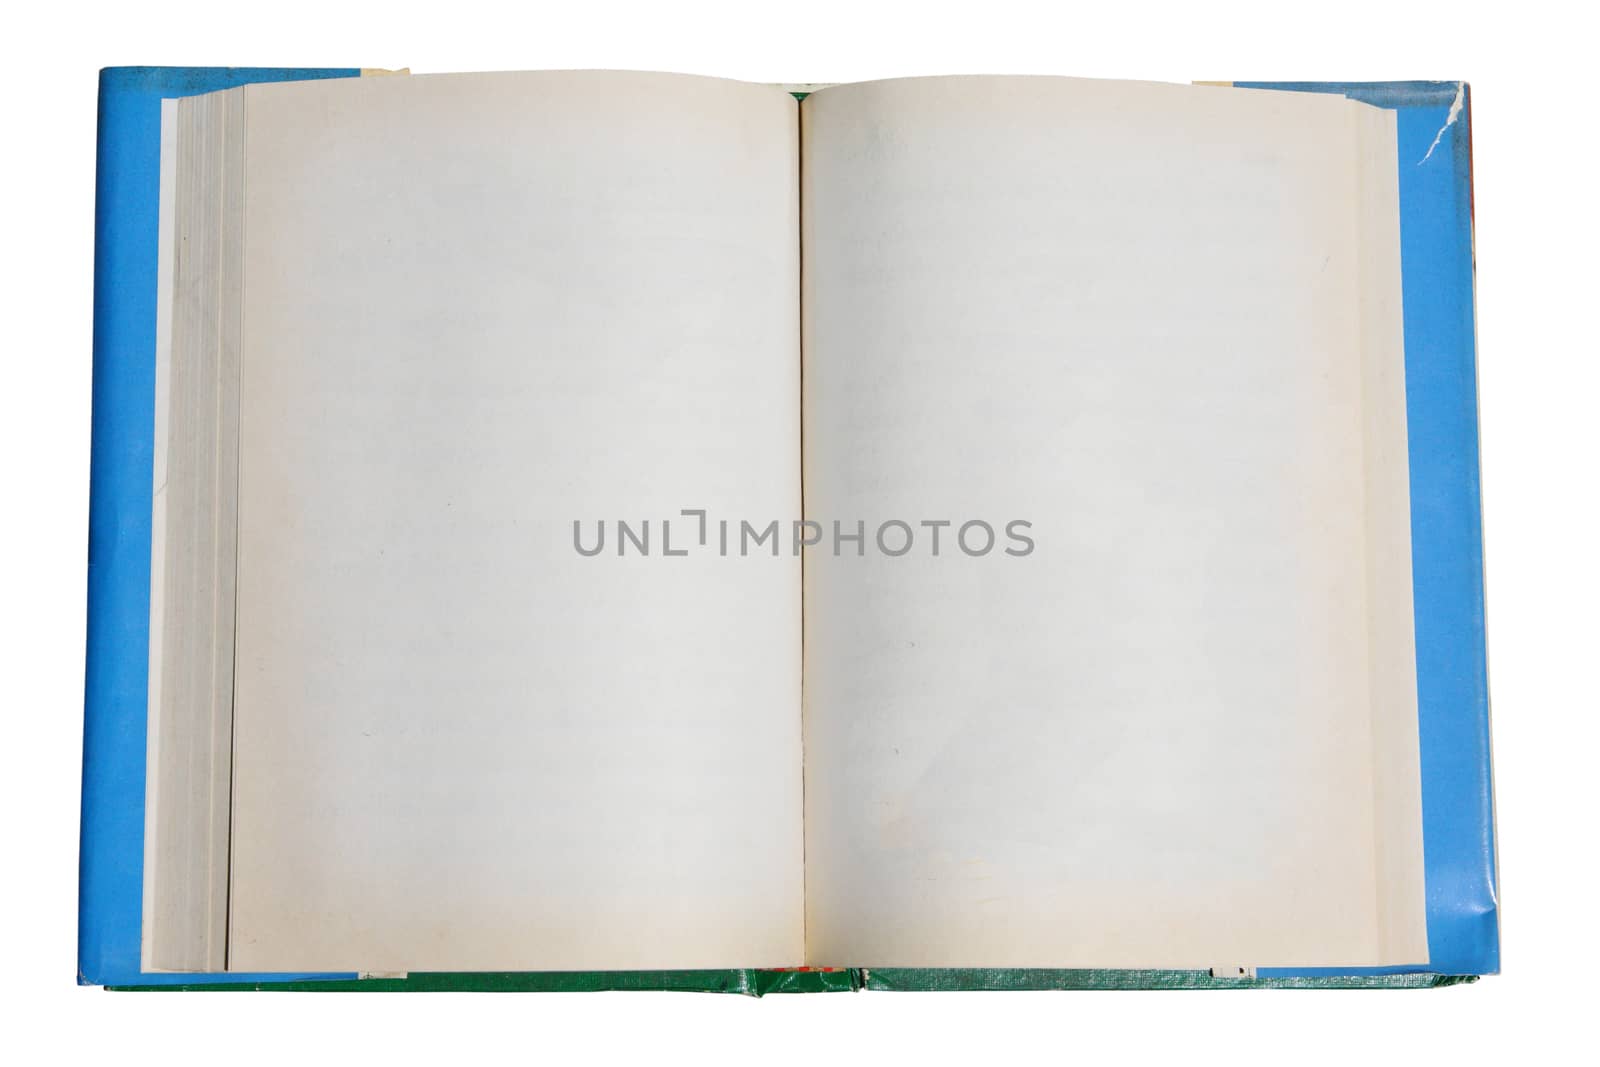 Blank old book open on white background